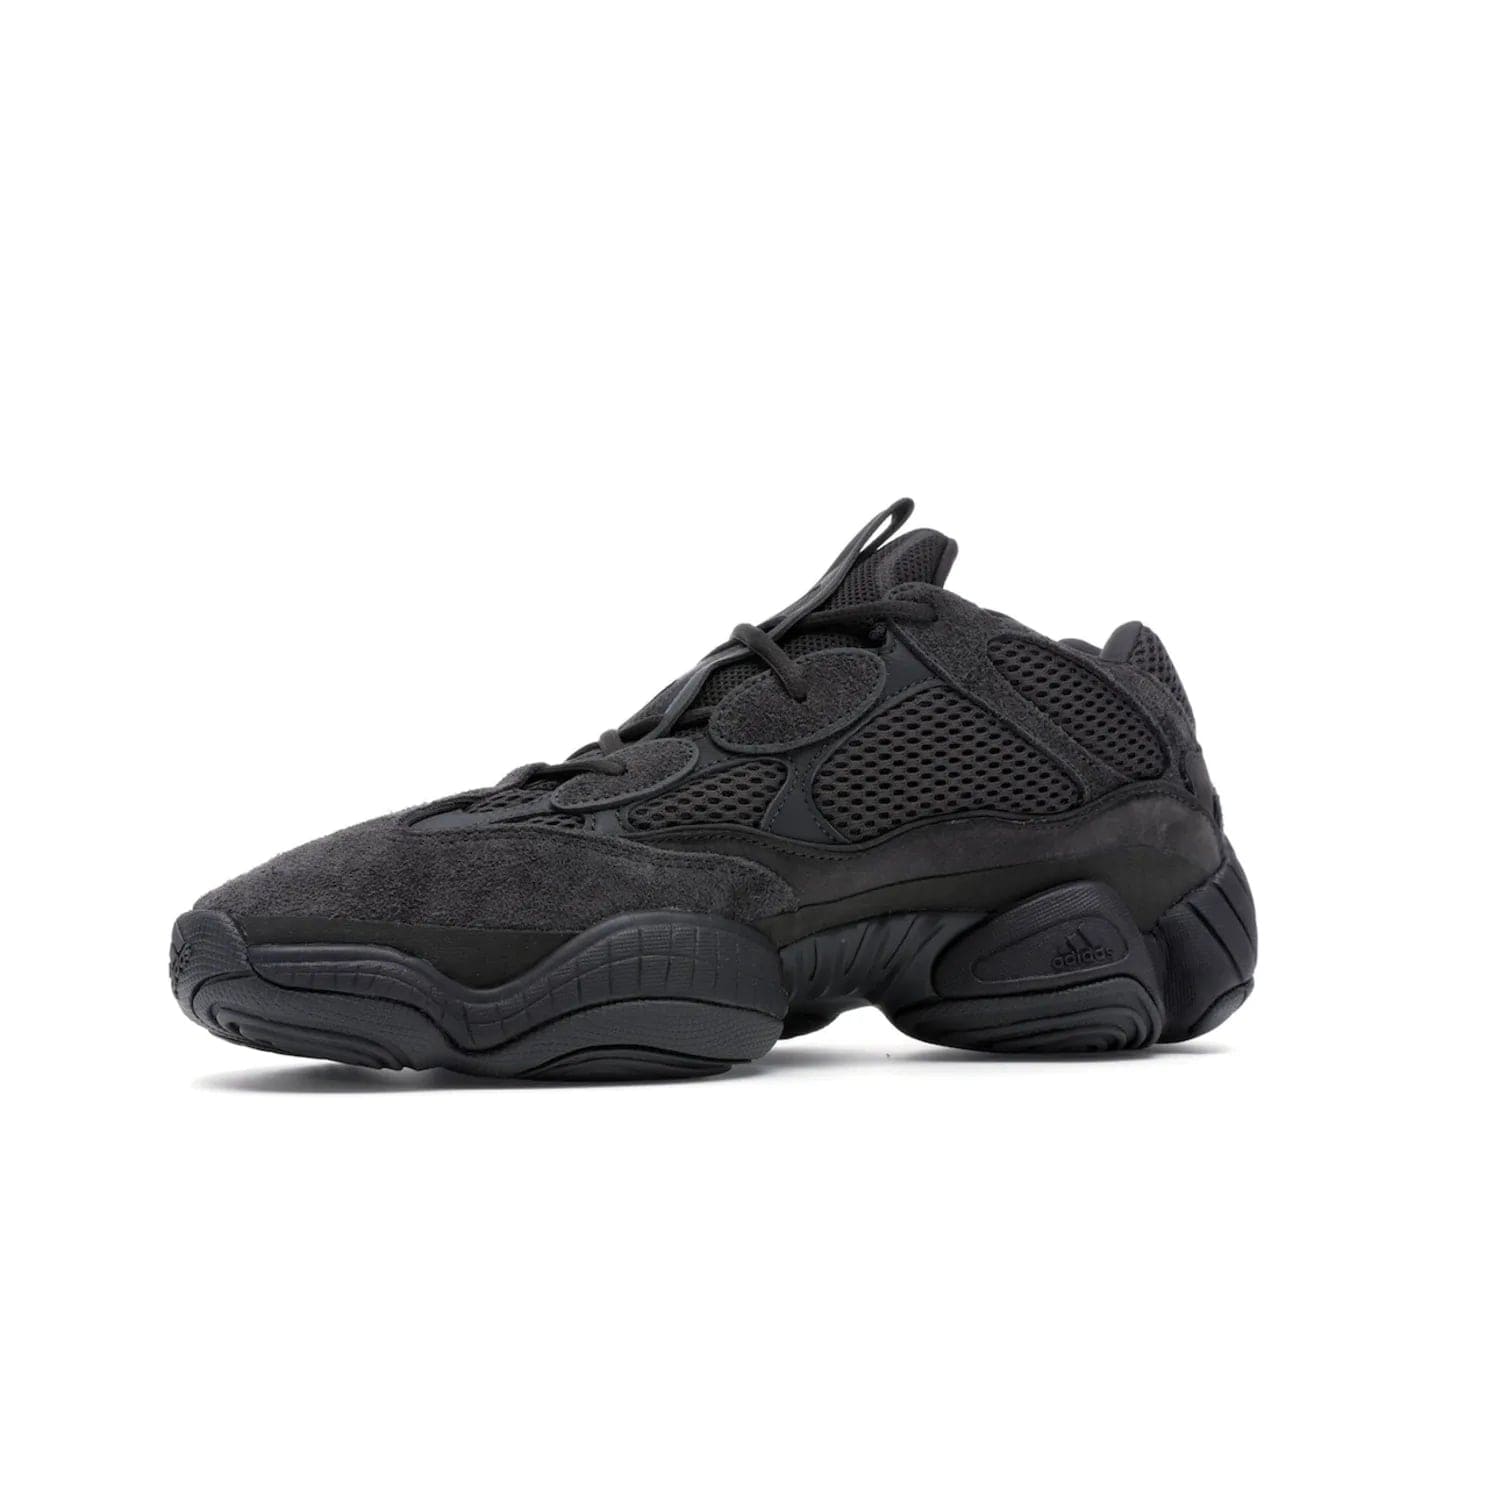 adidas Yeezy 500 Utility Black - Image 17 - Only at www.BallersClubKickz.com - Iconic adidas Yeezy 500 Utility Black in All-Black colorway. Durable black mesh and suede upper with adiPRENE® sole delivers comfort and support. Be unstoppable with the Yeezy 500 Utility Black. Released July 2018.